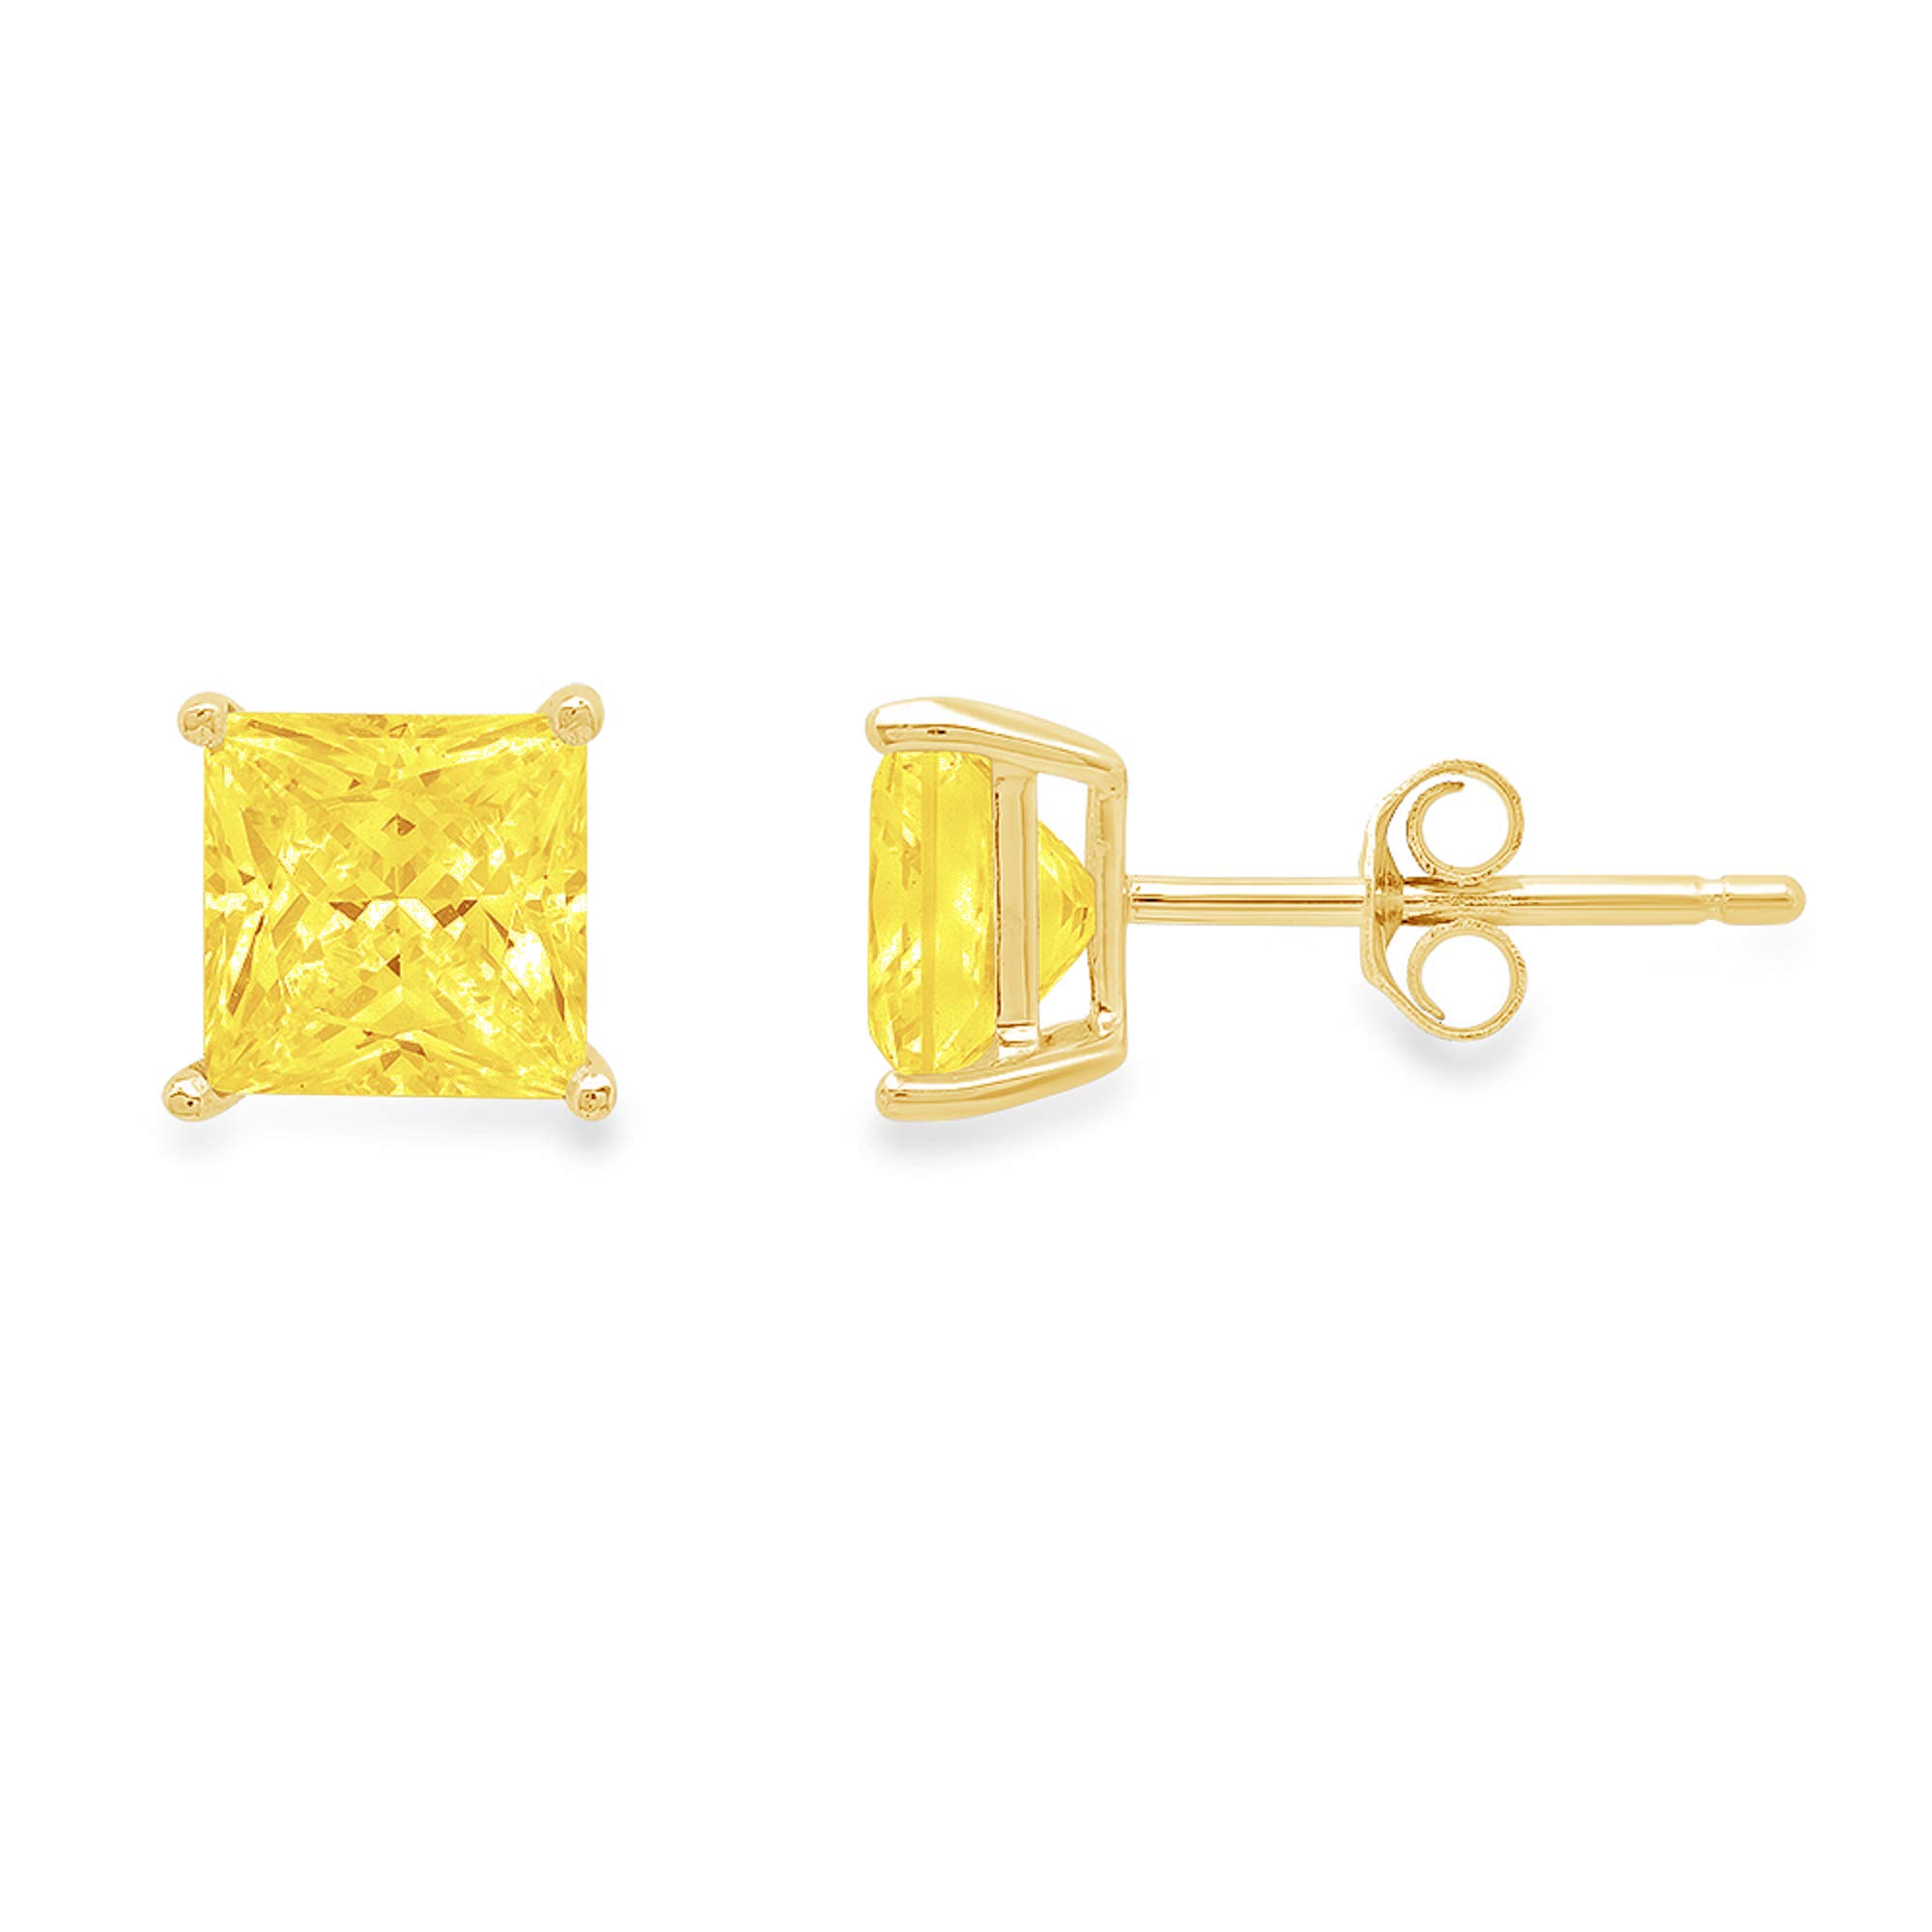 Clara Pucci 4.0 ct Princess Cut VVS1 Ideal Gemstone Solitaire Canary Yellow Simulated Diamond CZ Stunning Pair of gift Stud Earrings Solid 14k Yellow Gold Push Back